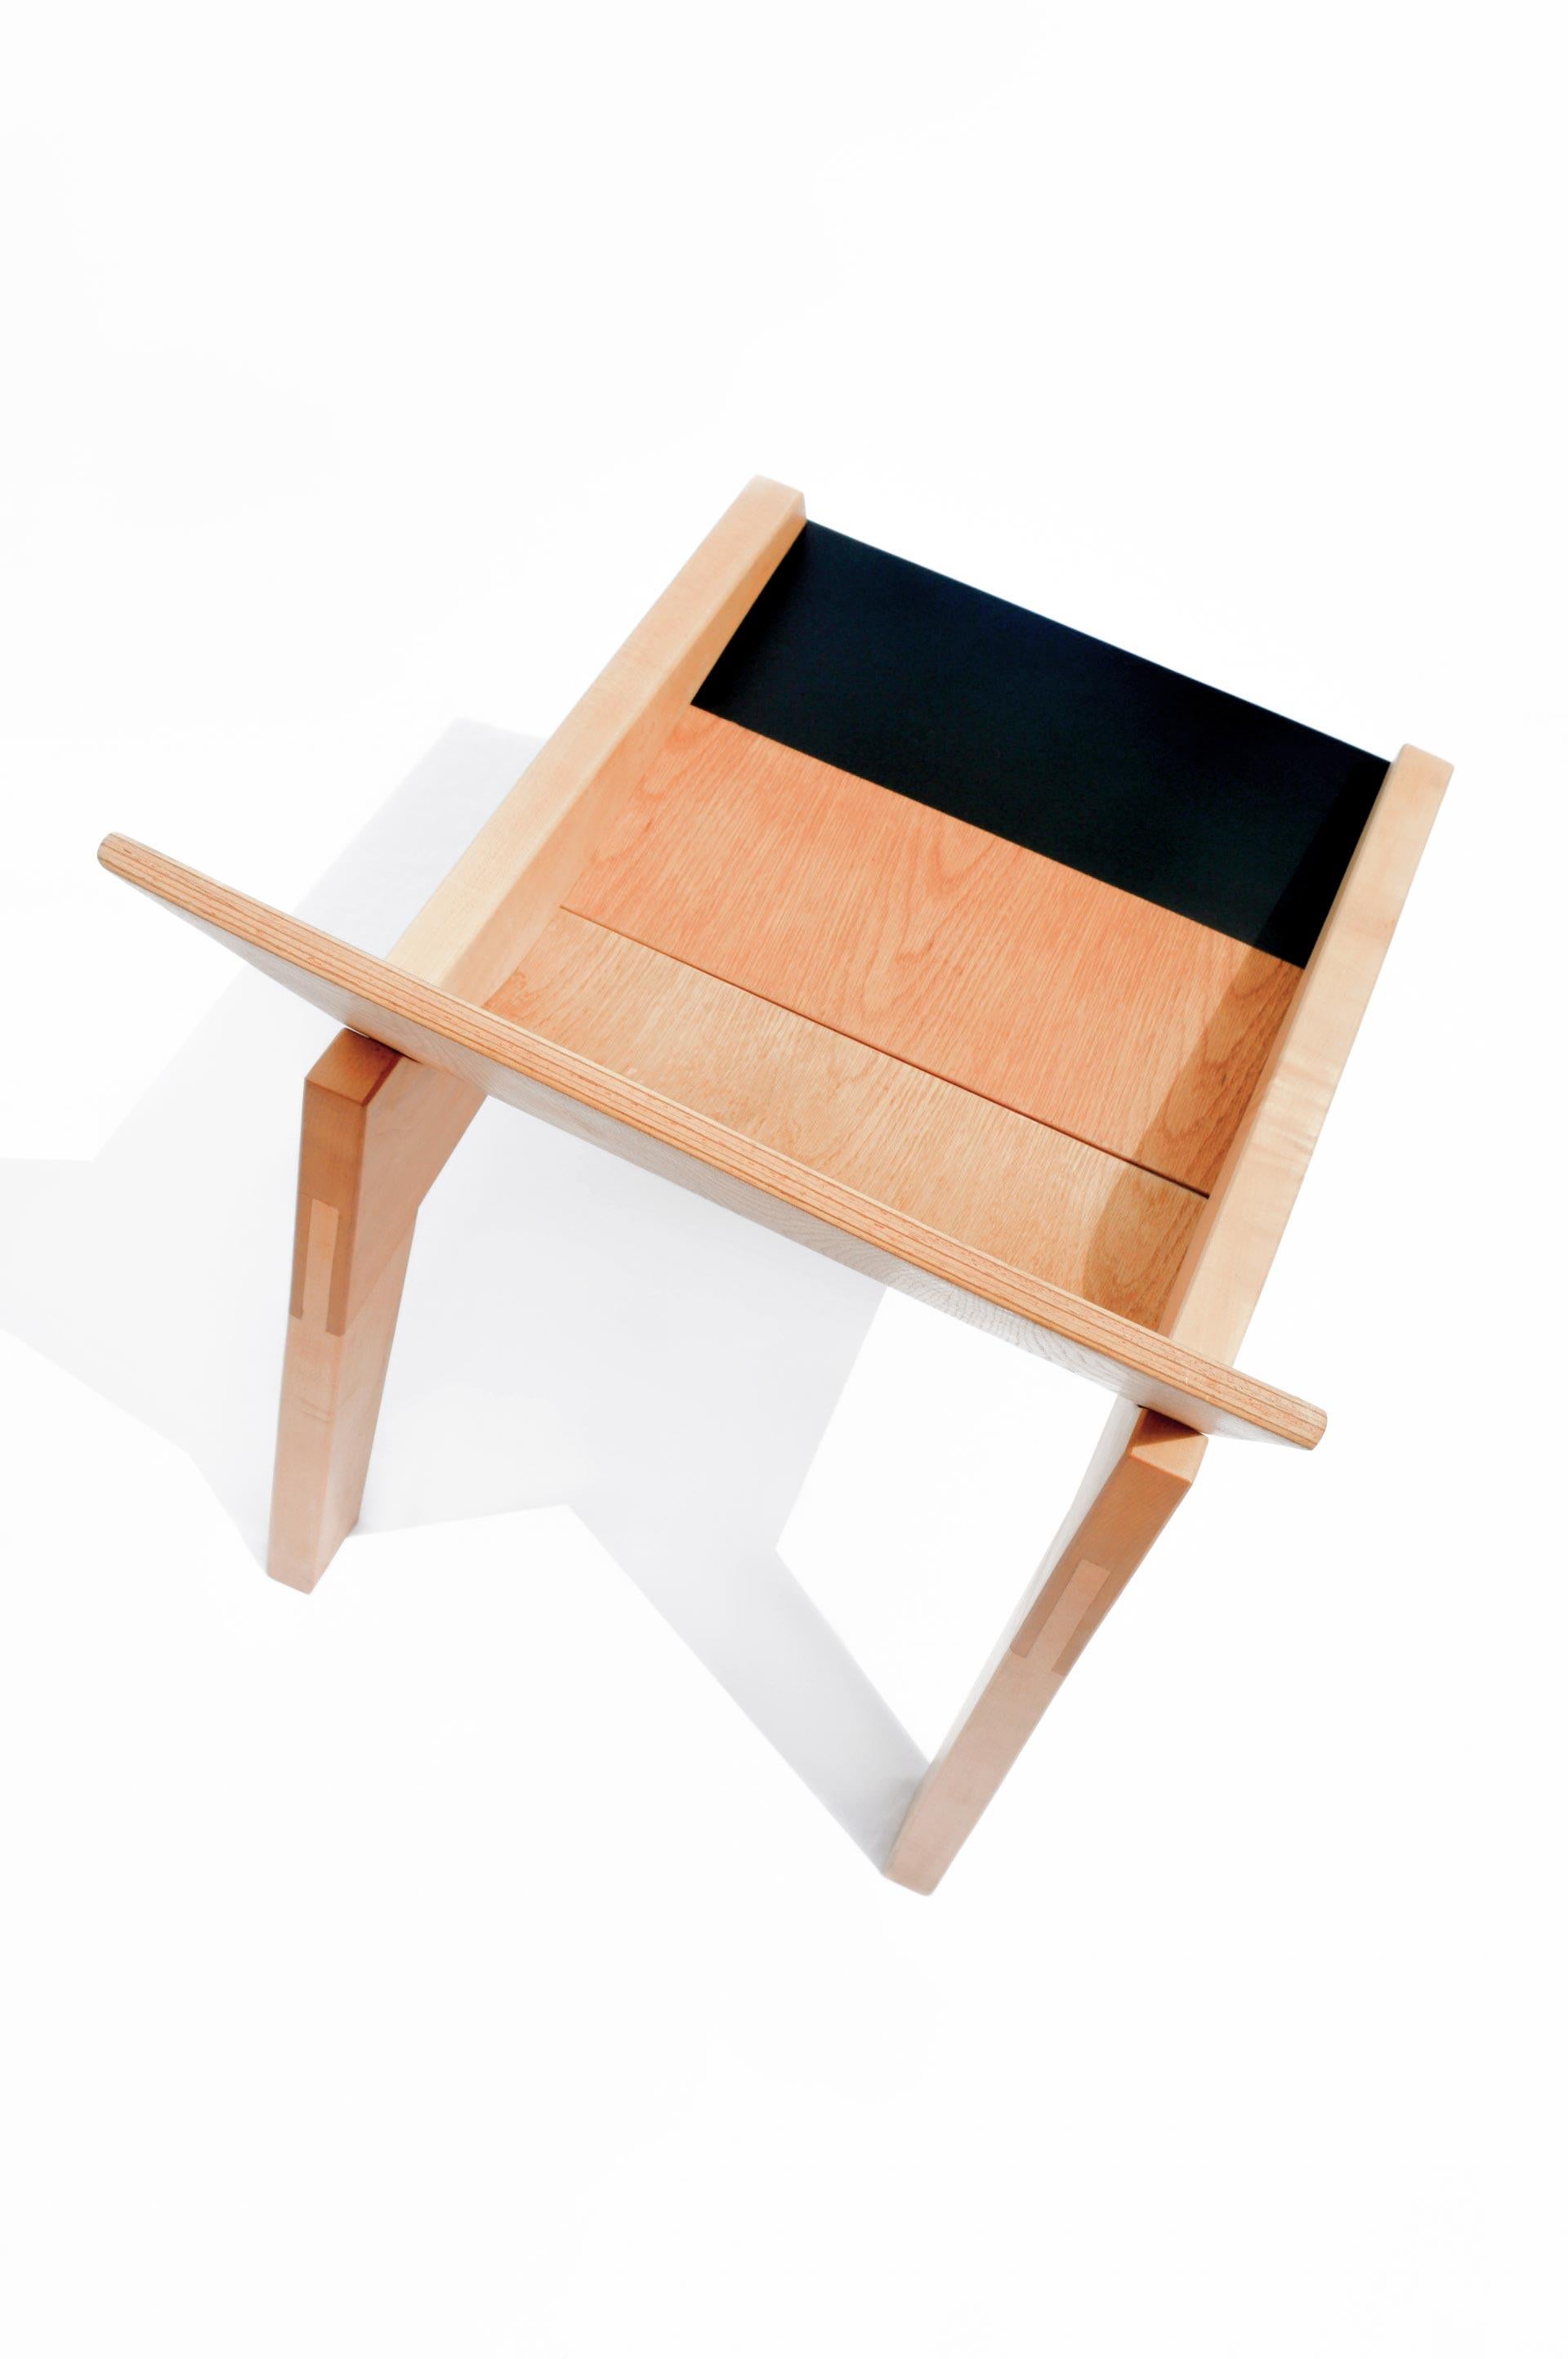 An Life' Chair by Dimitrih Correa is Presented by Dimitrih Correa

The piece is designed and handmade by Dimitrih Correa, a young designer and craftsman from Rio de Janeiro with a deep knowledge in the craftsmanship. Every piece is signed and